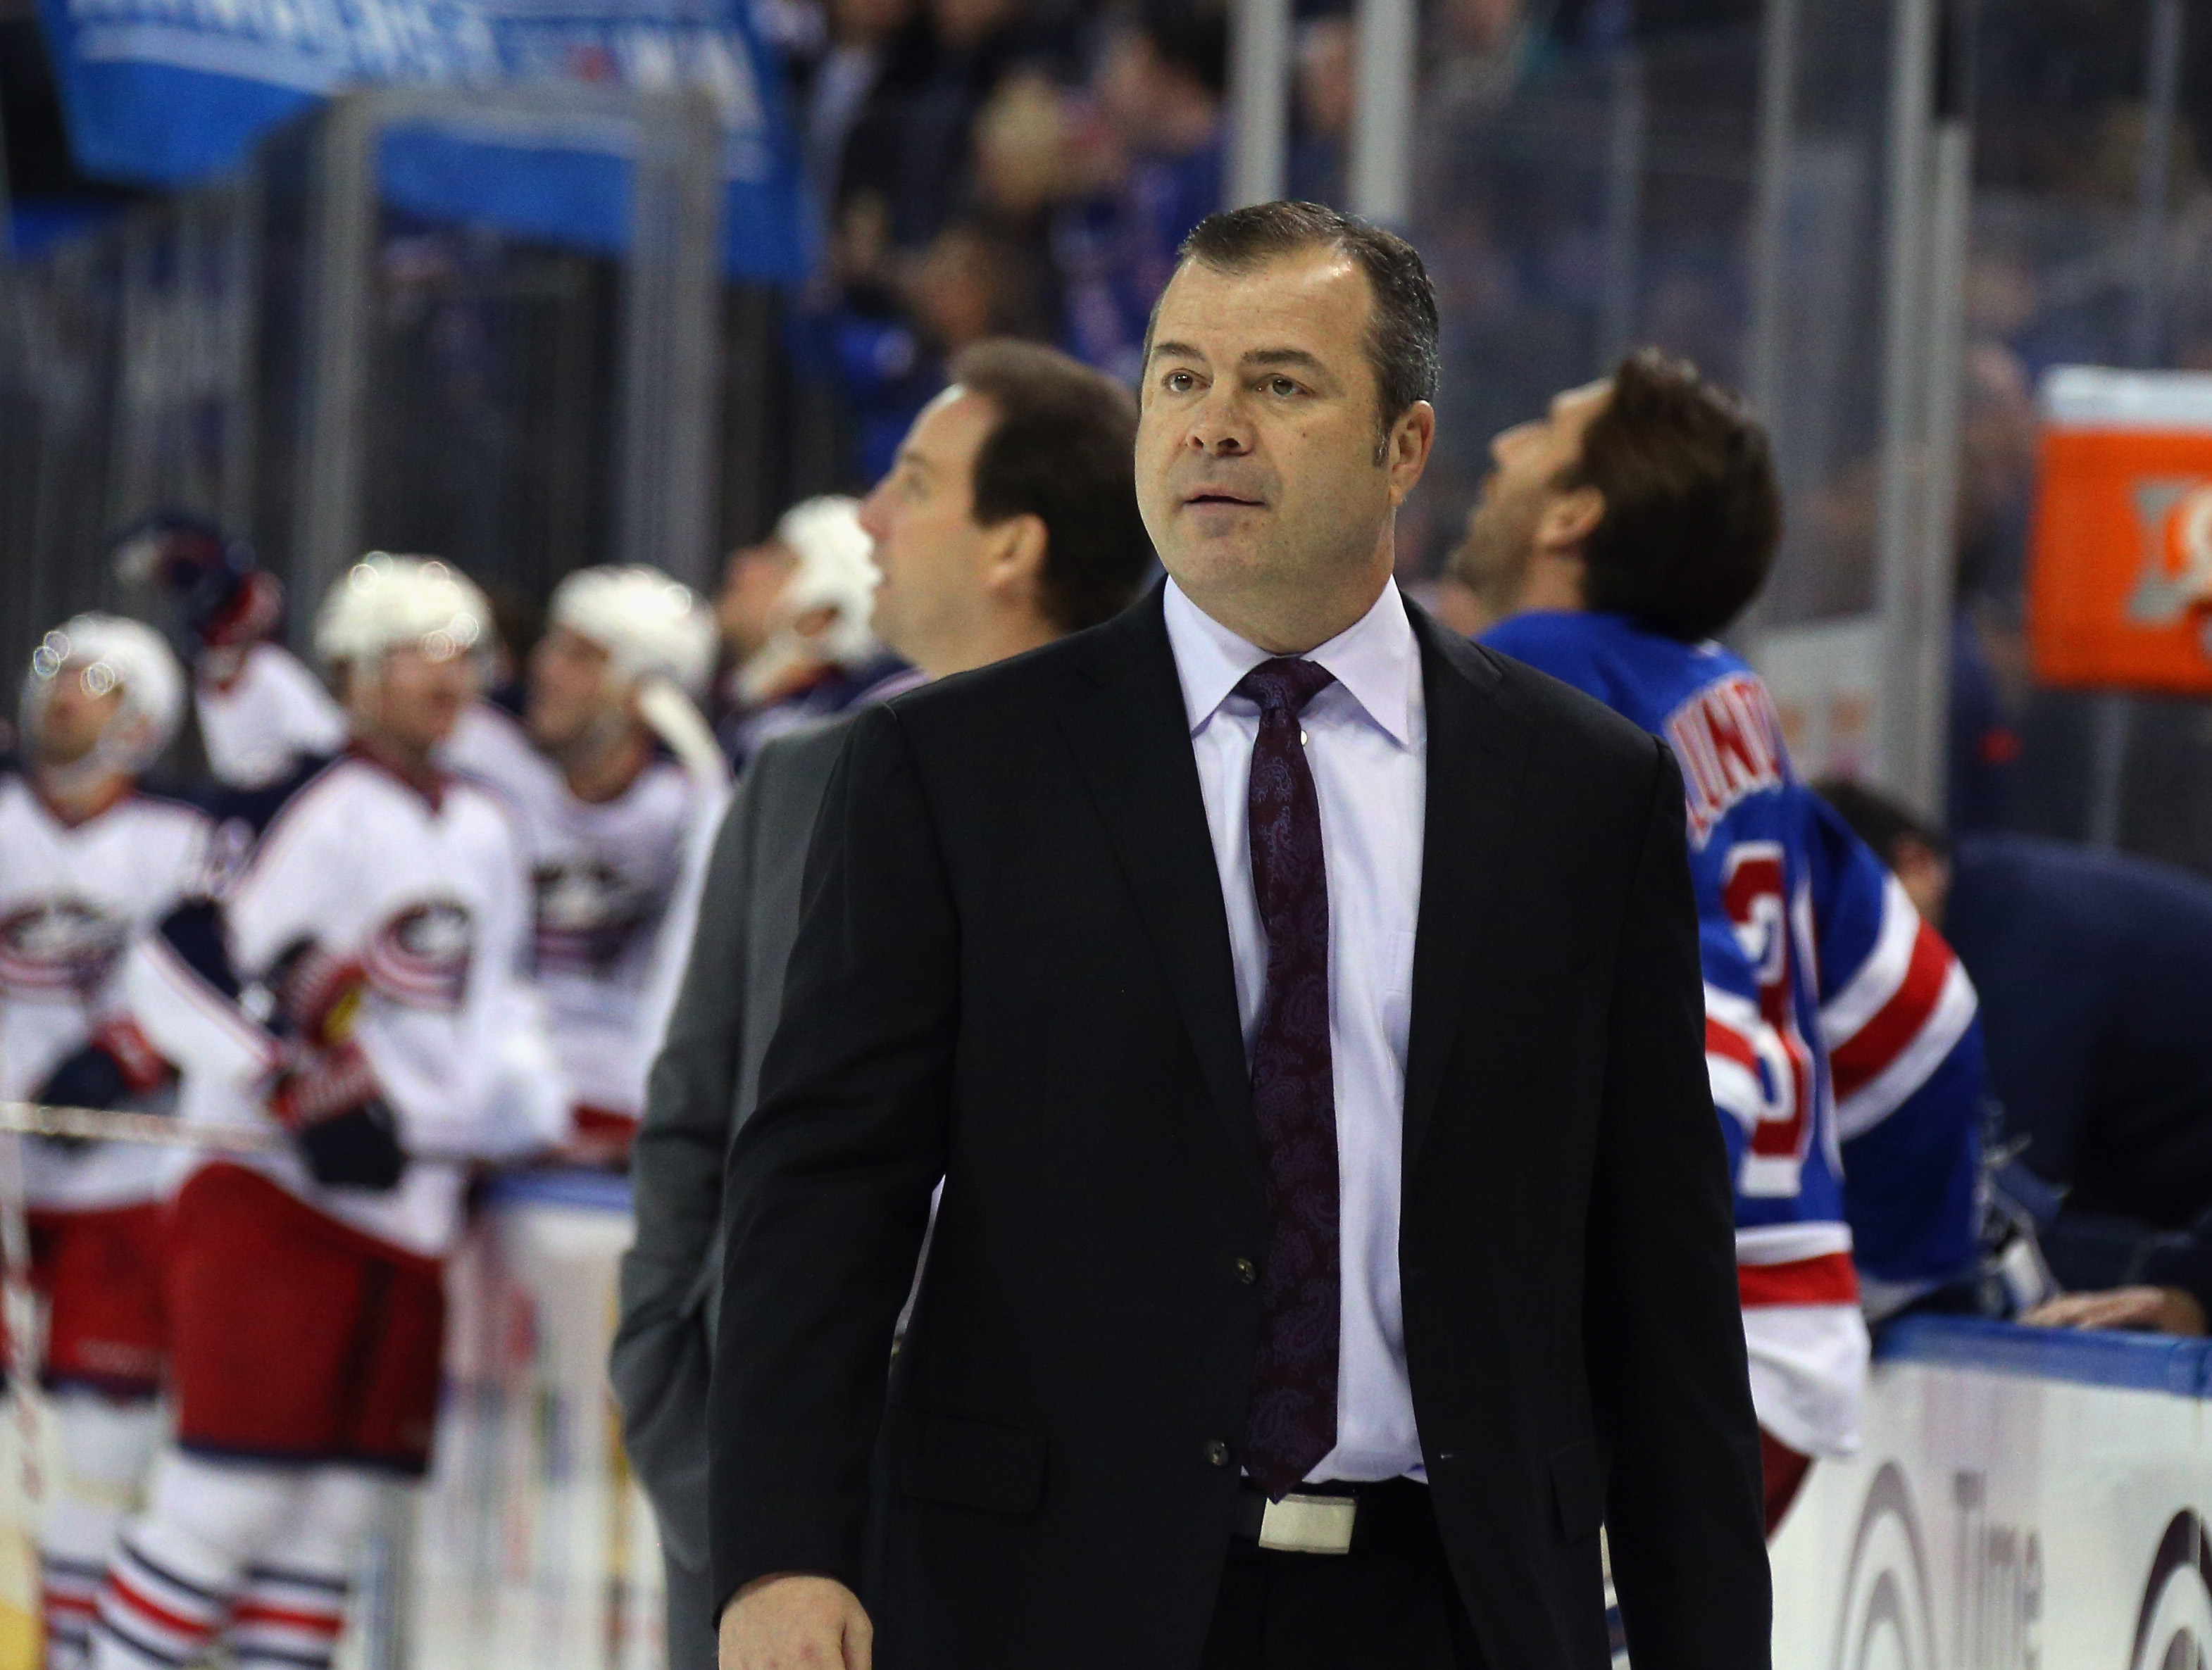 NEW YORK, NY - FEBRUARY 29: Alain Vigneault of the New York Rangers leaves the ice following a game against the Columbus Blue Jackets at Madison Square Garden on February 29, 2016 in New York City. The Rangers defeated the Blue Jackets 2-1. (Photo by Bruce Bennett/Getty Images)